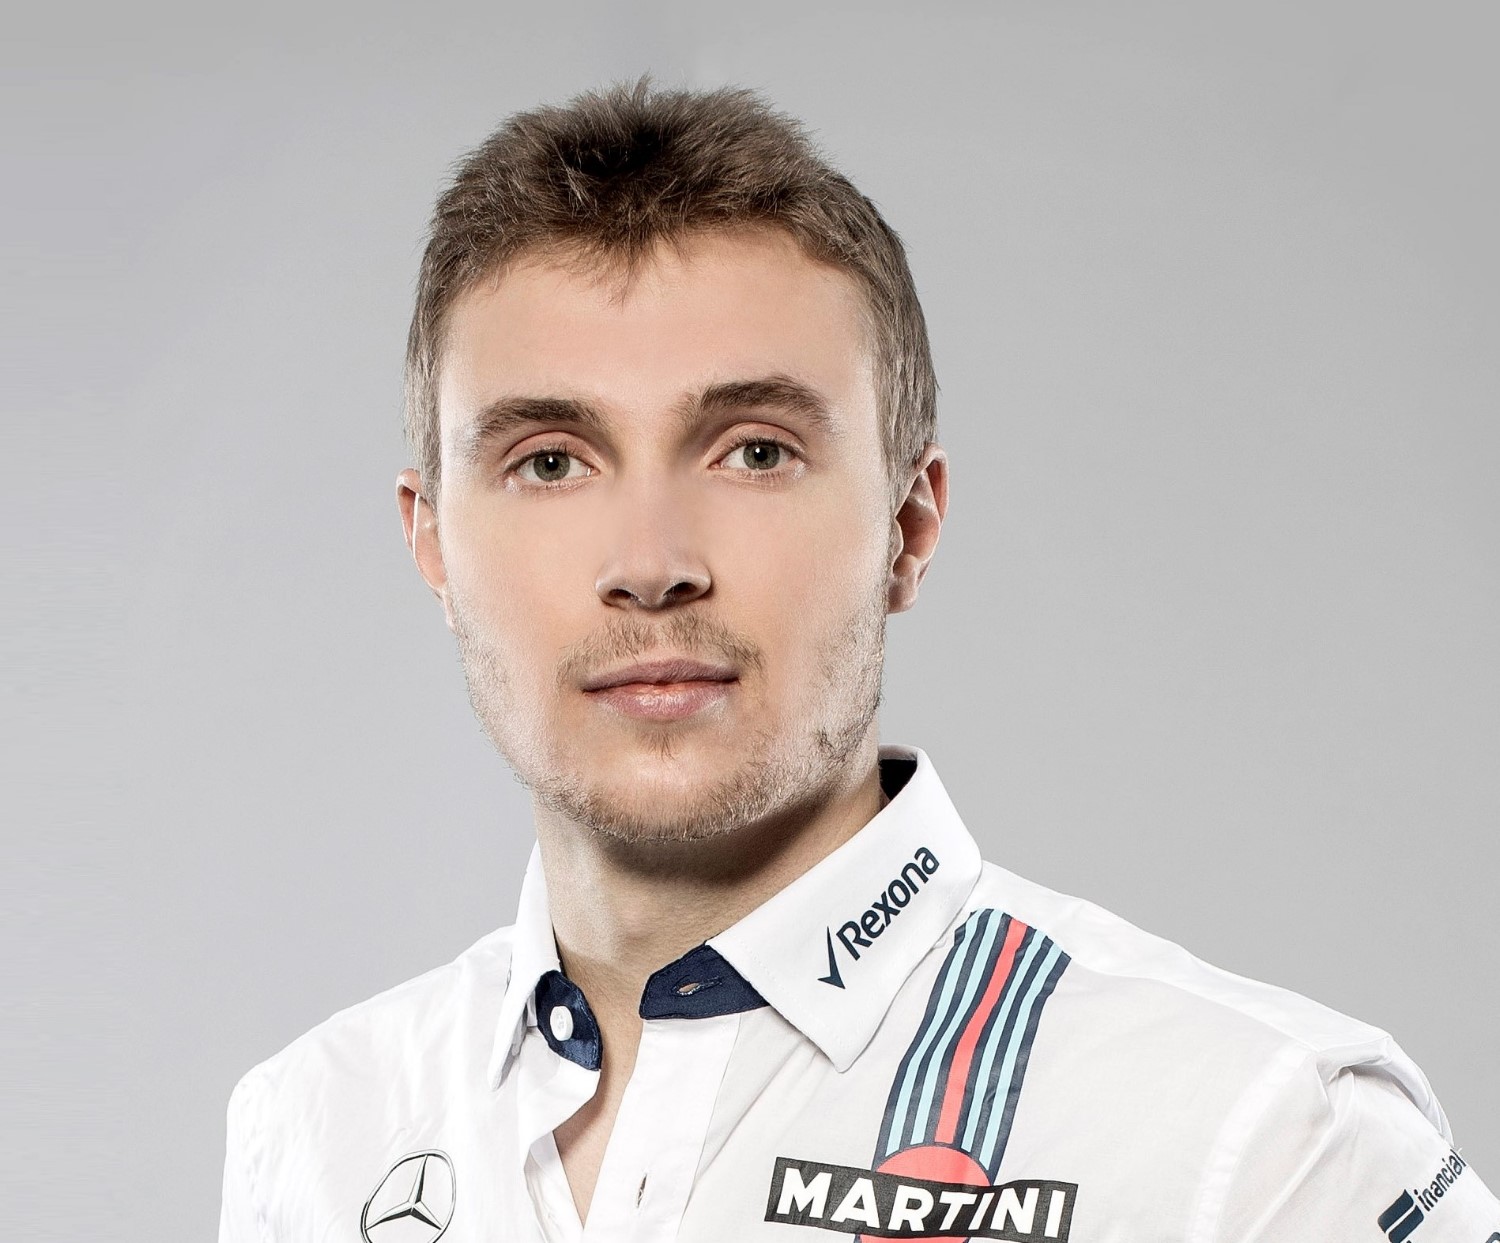 For what it cost for Sergey Sirotkin to be a Friday morning track cleaner is F1, he could run a full season of IndyCar. But since IndyCar has no TV coverage globally, the Russians have no interest